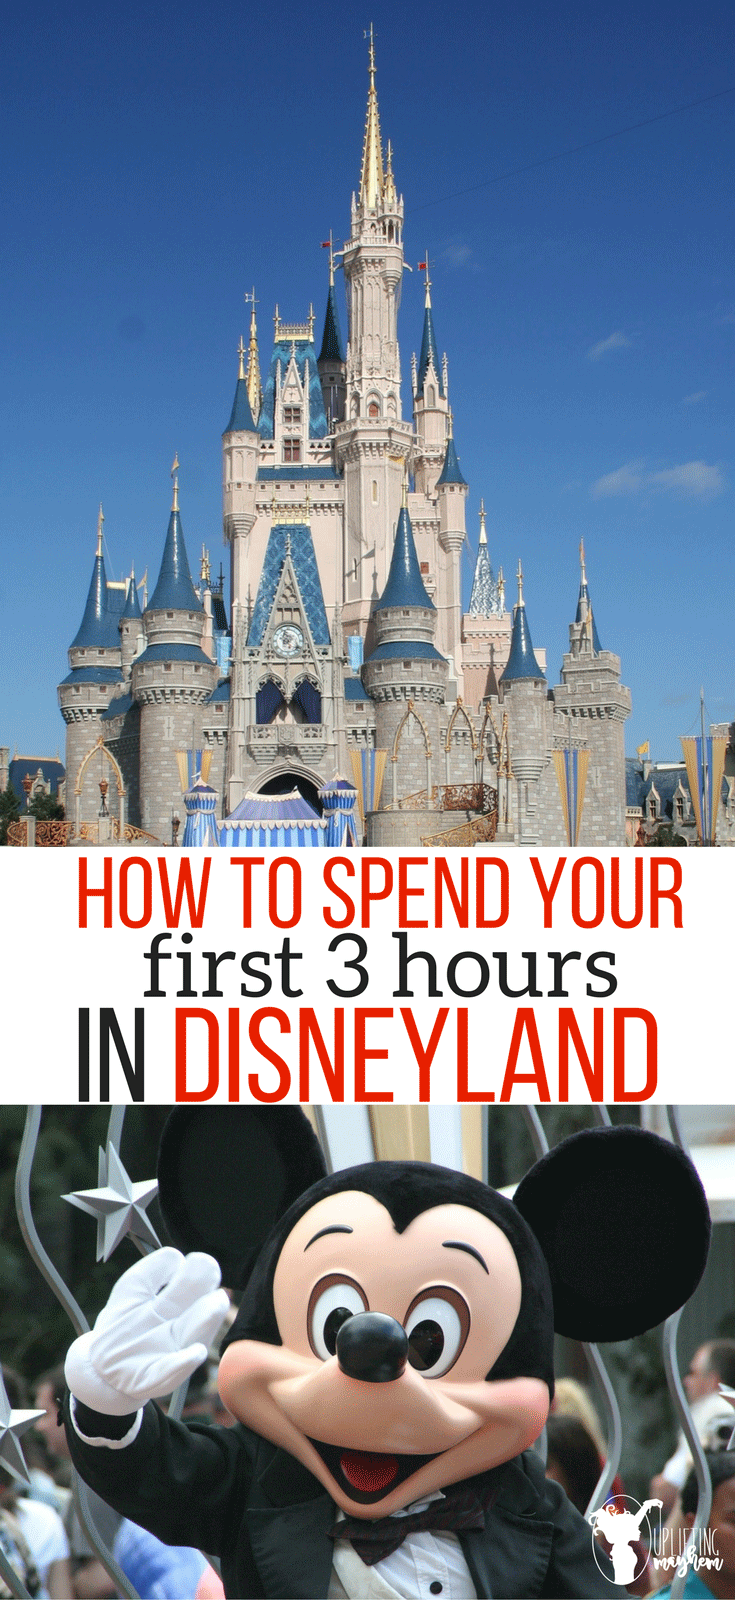 How to Spend the first 3 hours in Disney Land